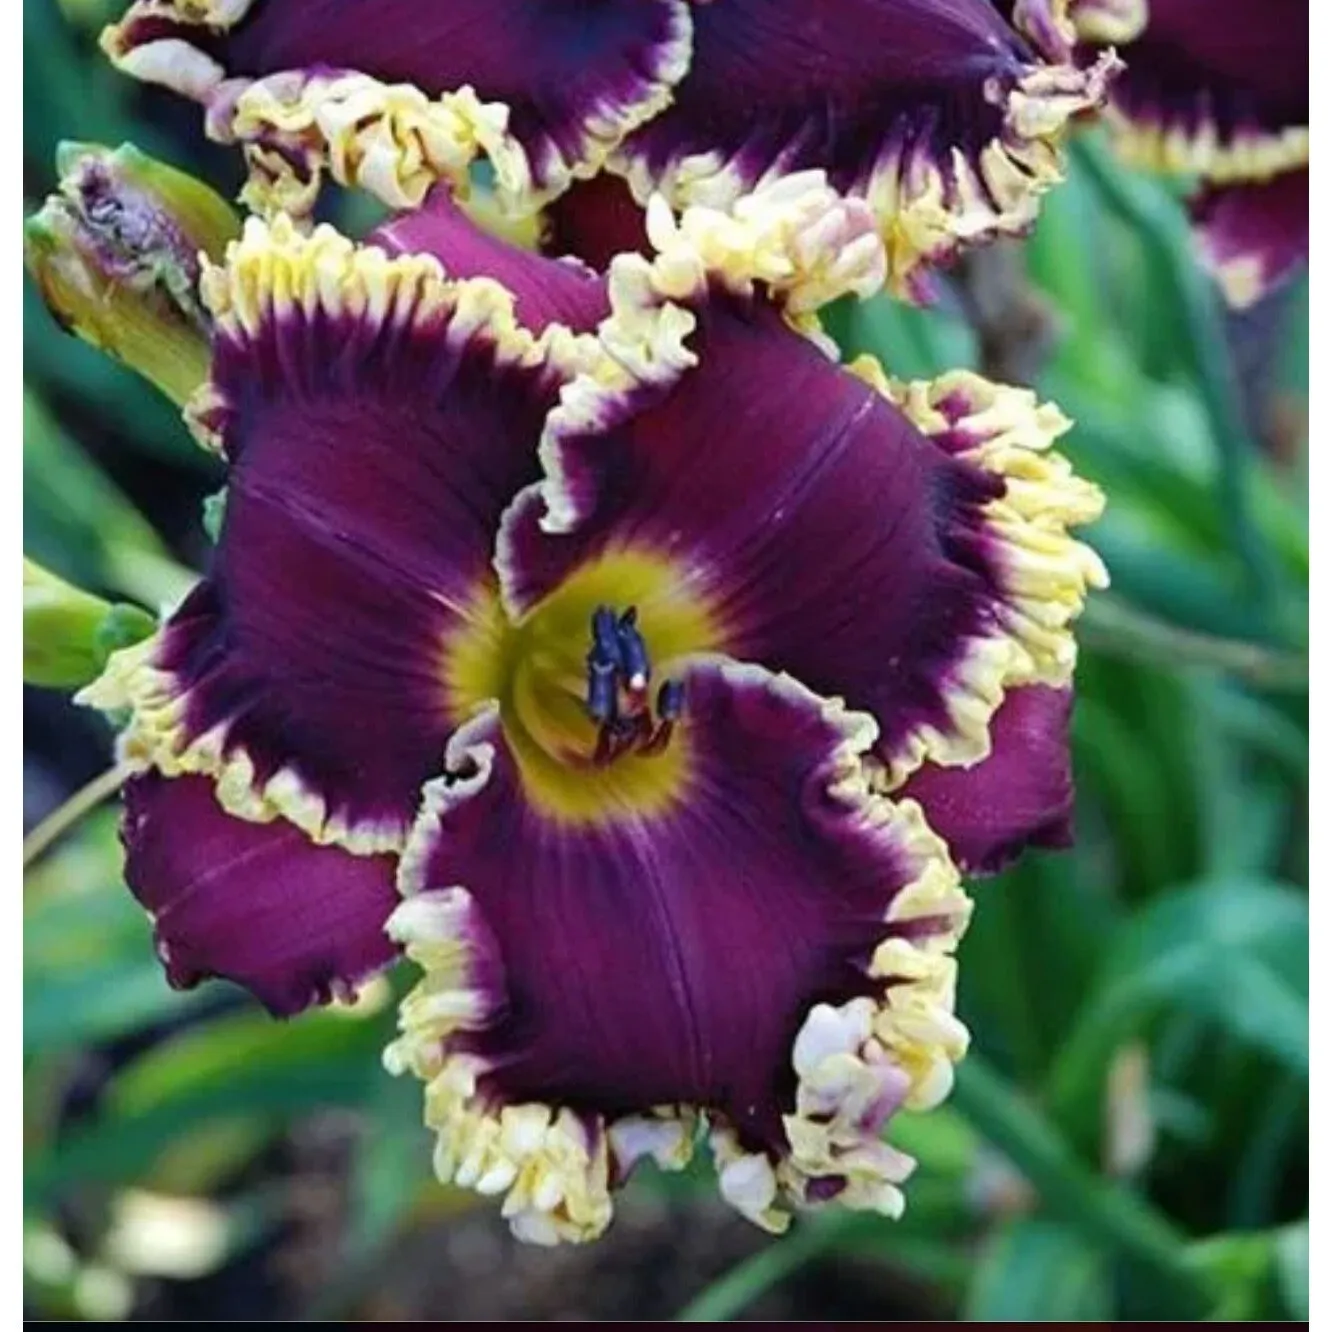  50 Seeds Daylily Hybrid Flowers Seeds Non GMO Fast Shipping US - $10.99